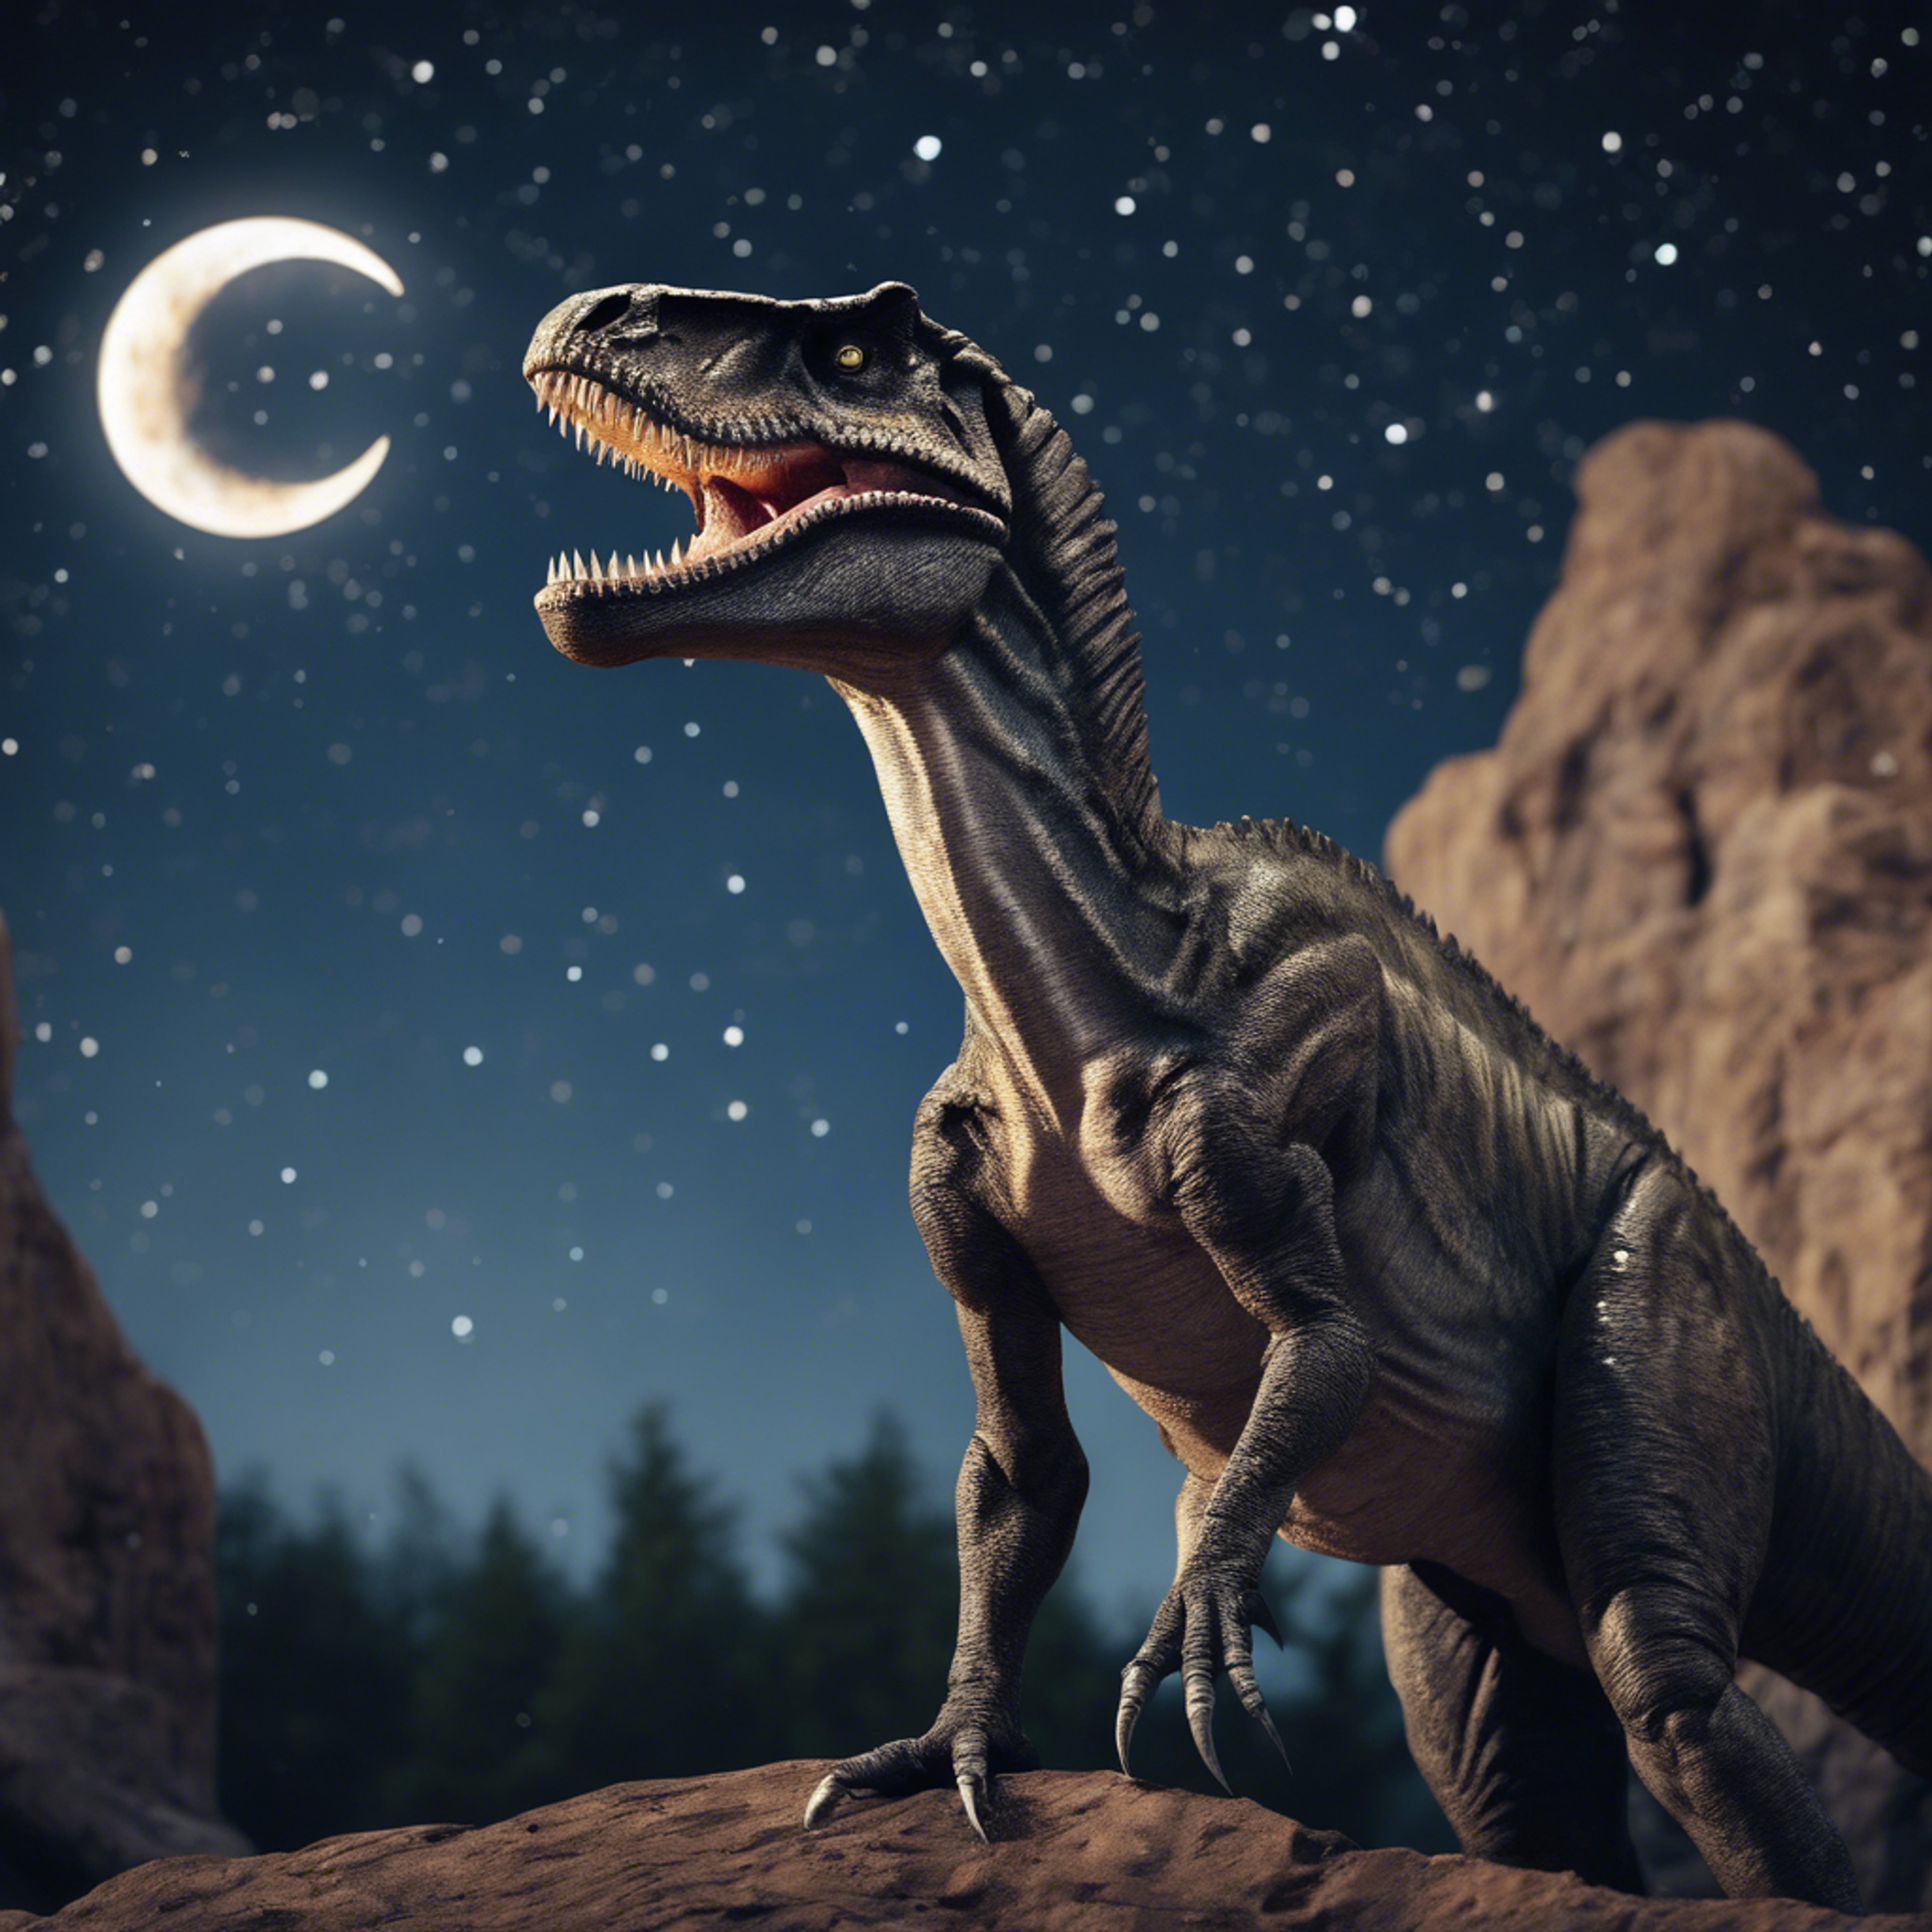 An Allosaurus under the bright starry night sky, howling at the crescent moon delicately.壁紙[f8d2841798534275b963]